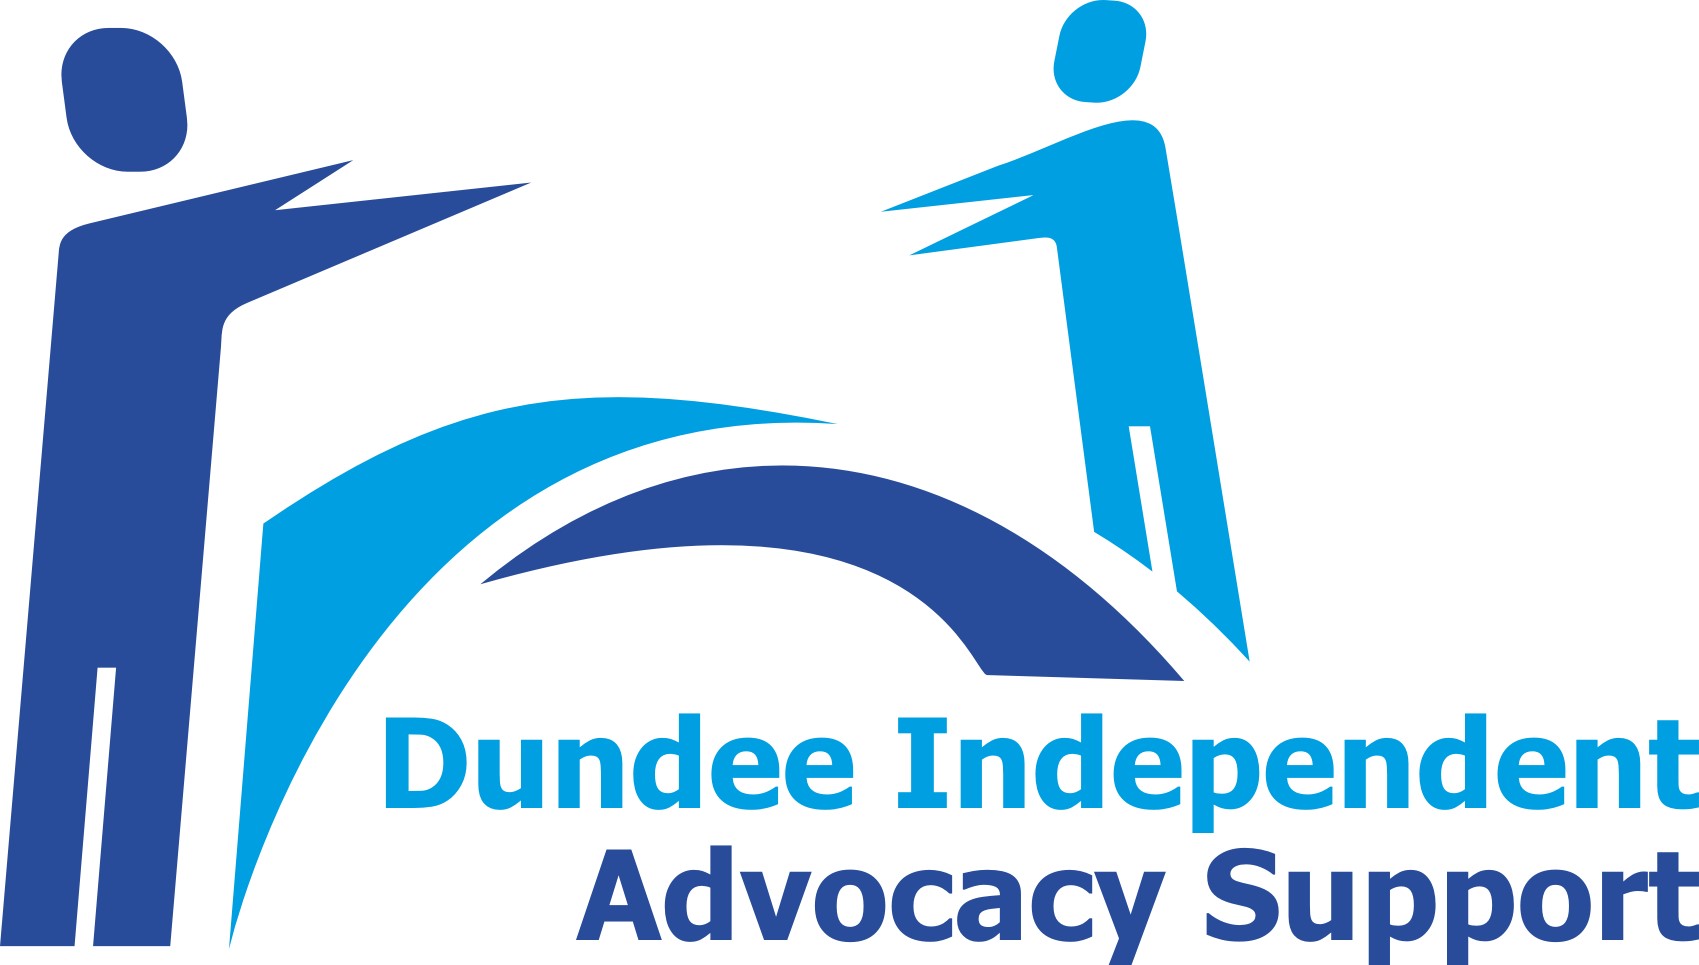 Dundee Independent Advocacy Support Logo